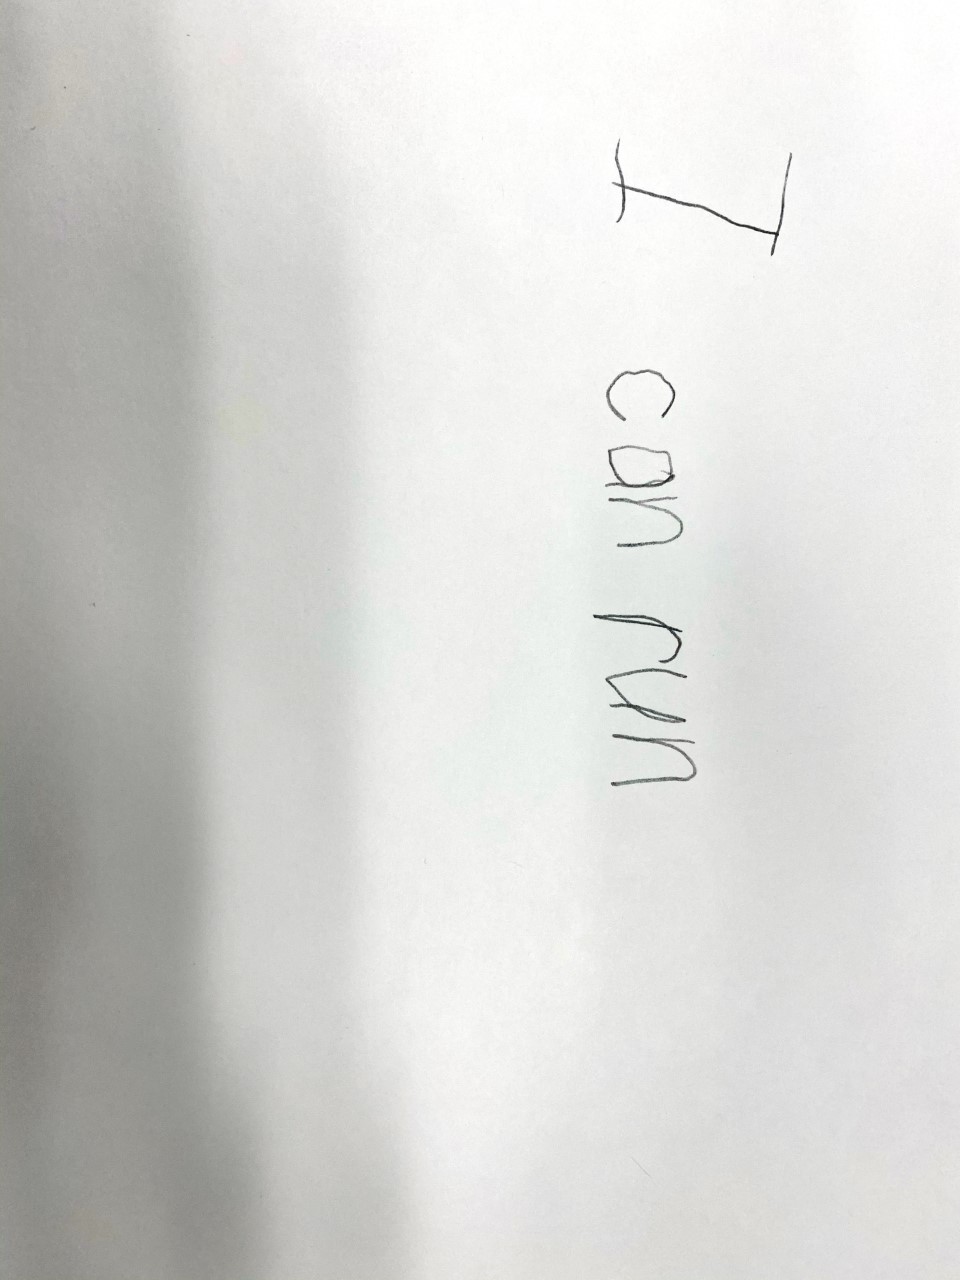 a three word sentence written by a child